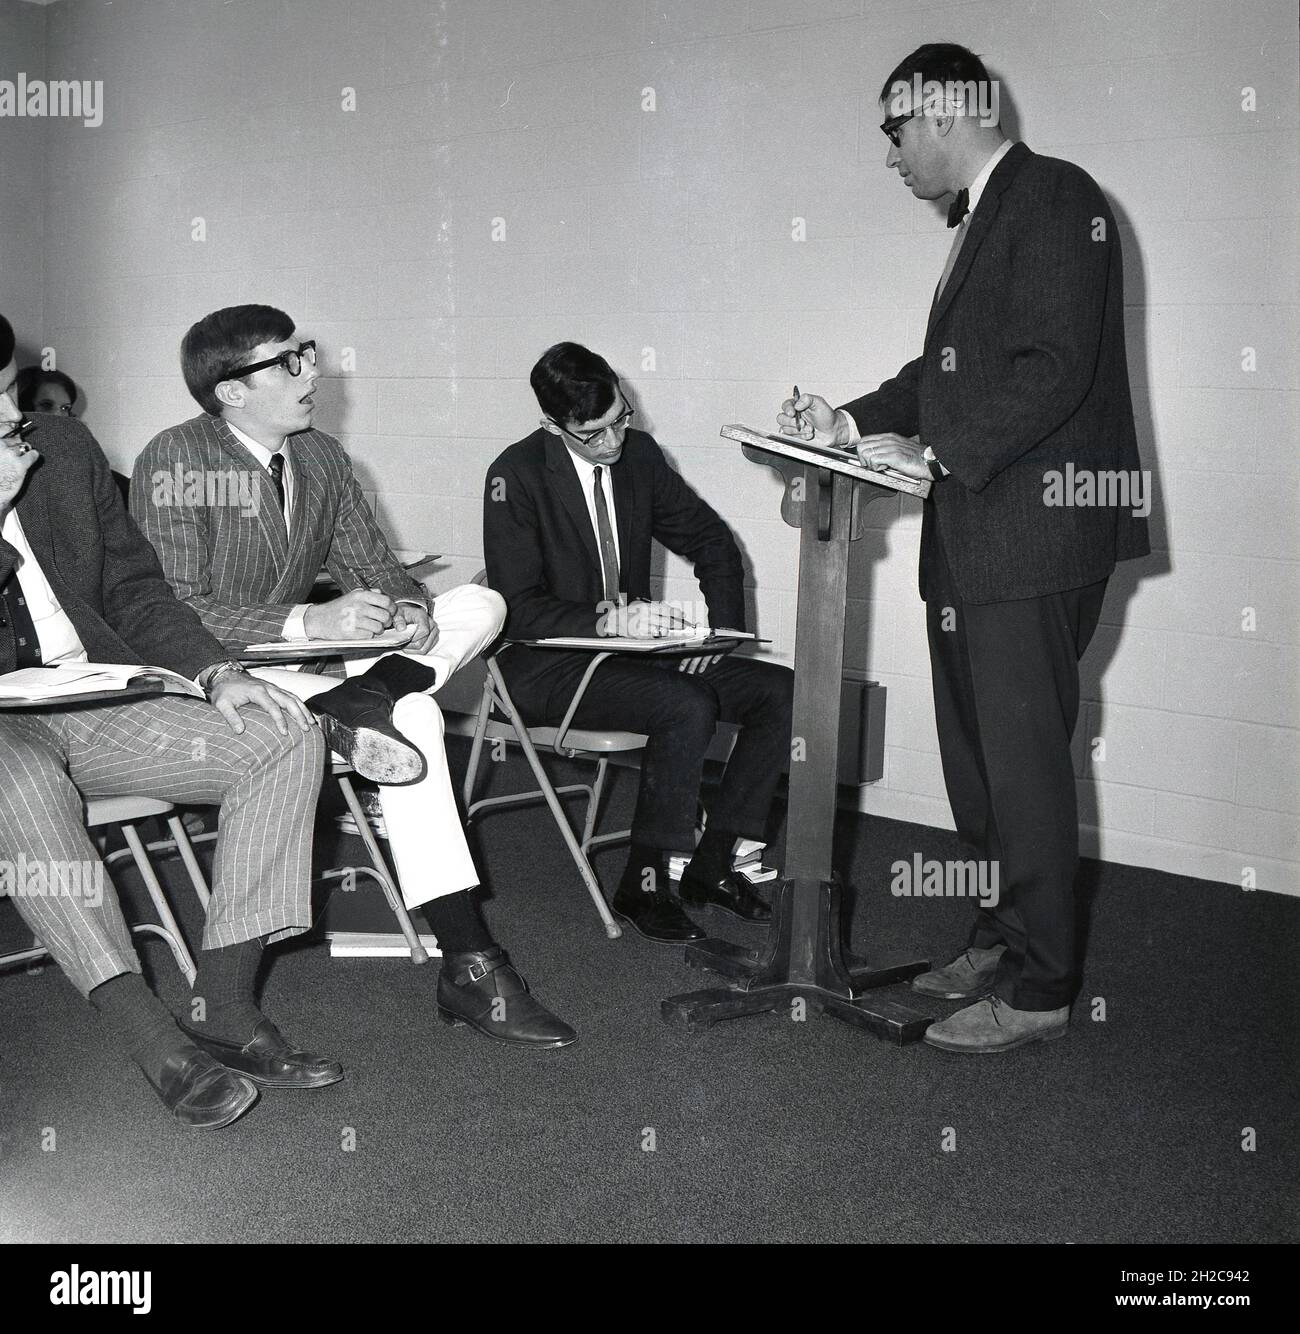 1960s, historical, in a room some male undergraduate students sitting on metal chairs listening to a teacher standing at a lectern, giving a talk in a philosophy class, Monroe College, USA Stock Photo